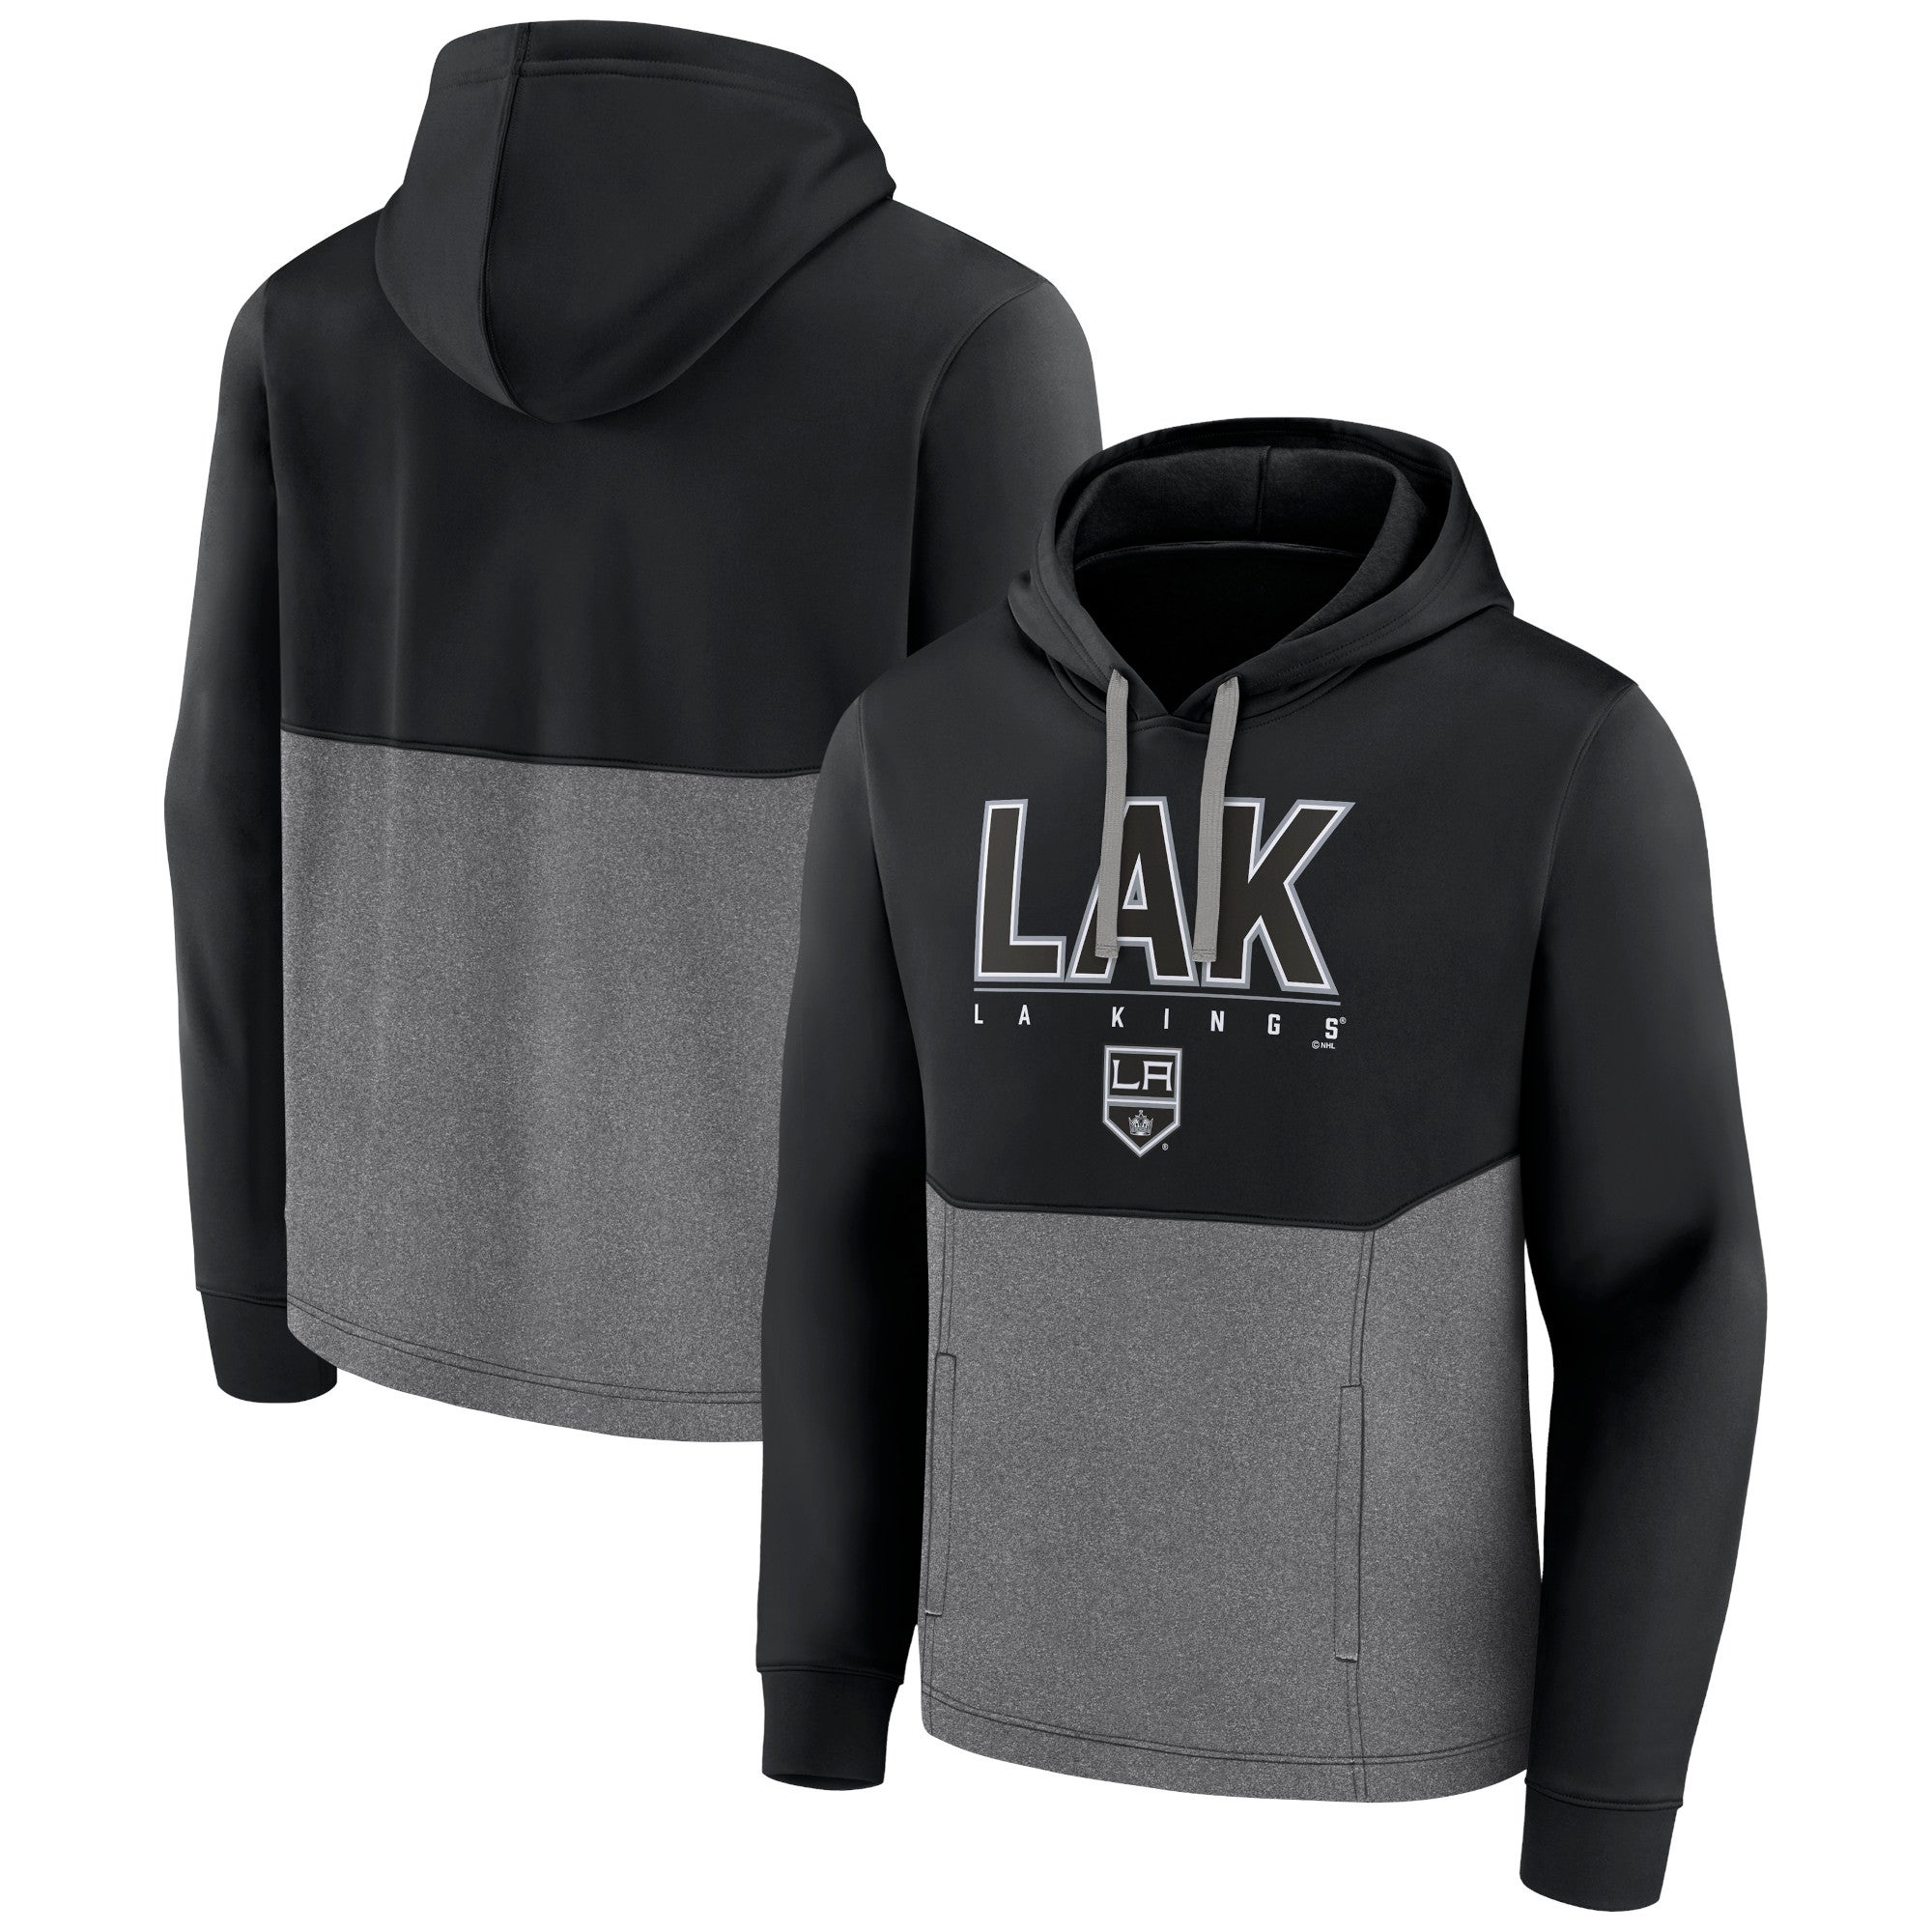 Men's Fanatics Branded Gray Los Angeles Kings Authentic Pro Pullover Hoodie